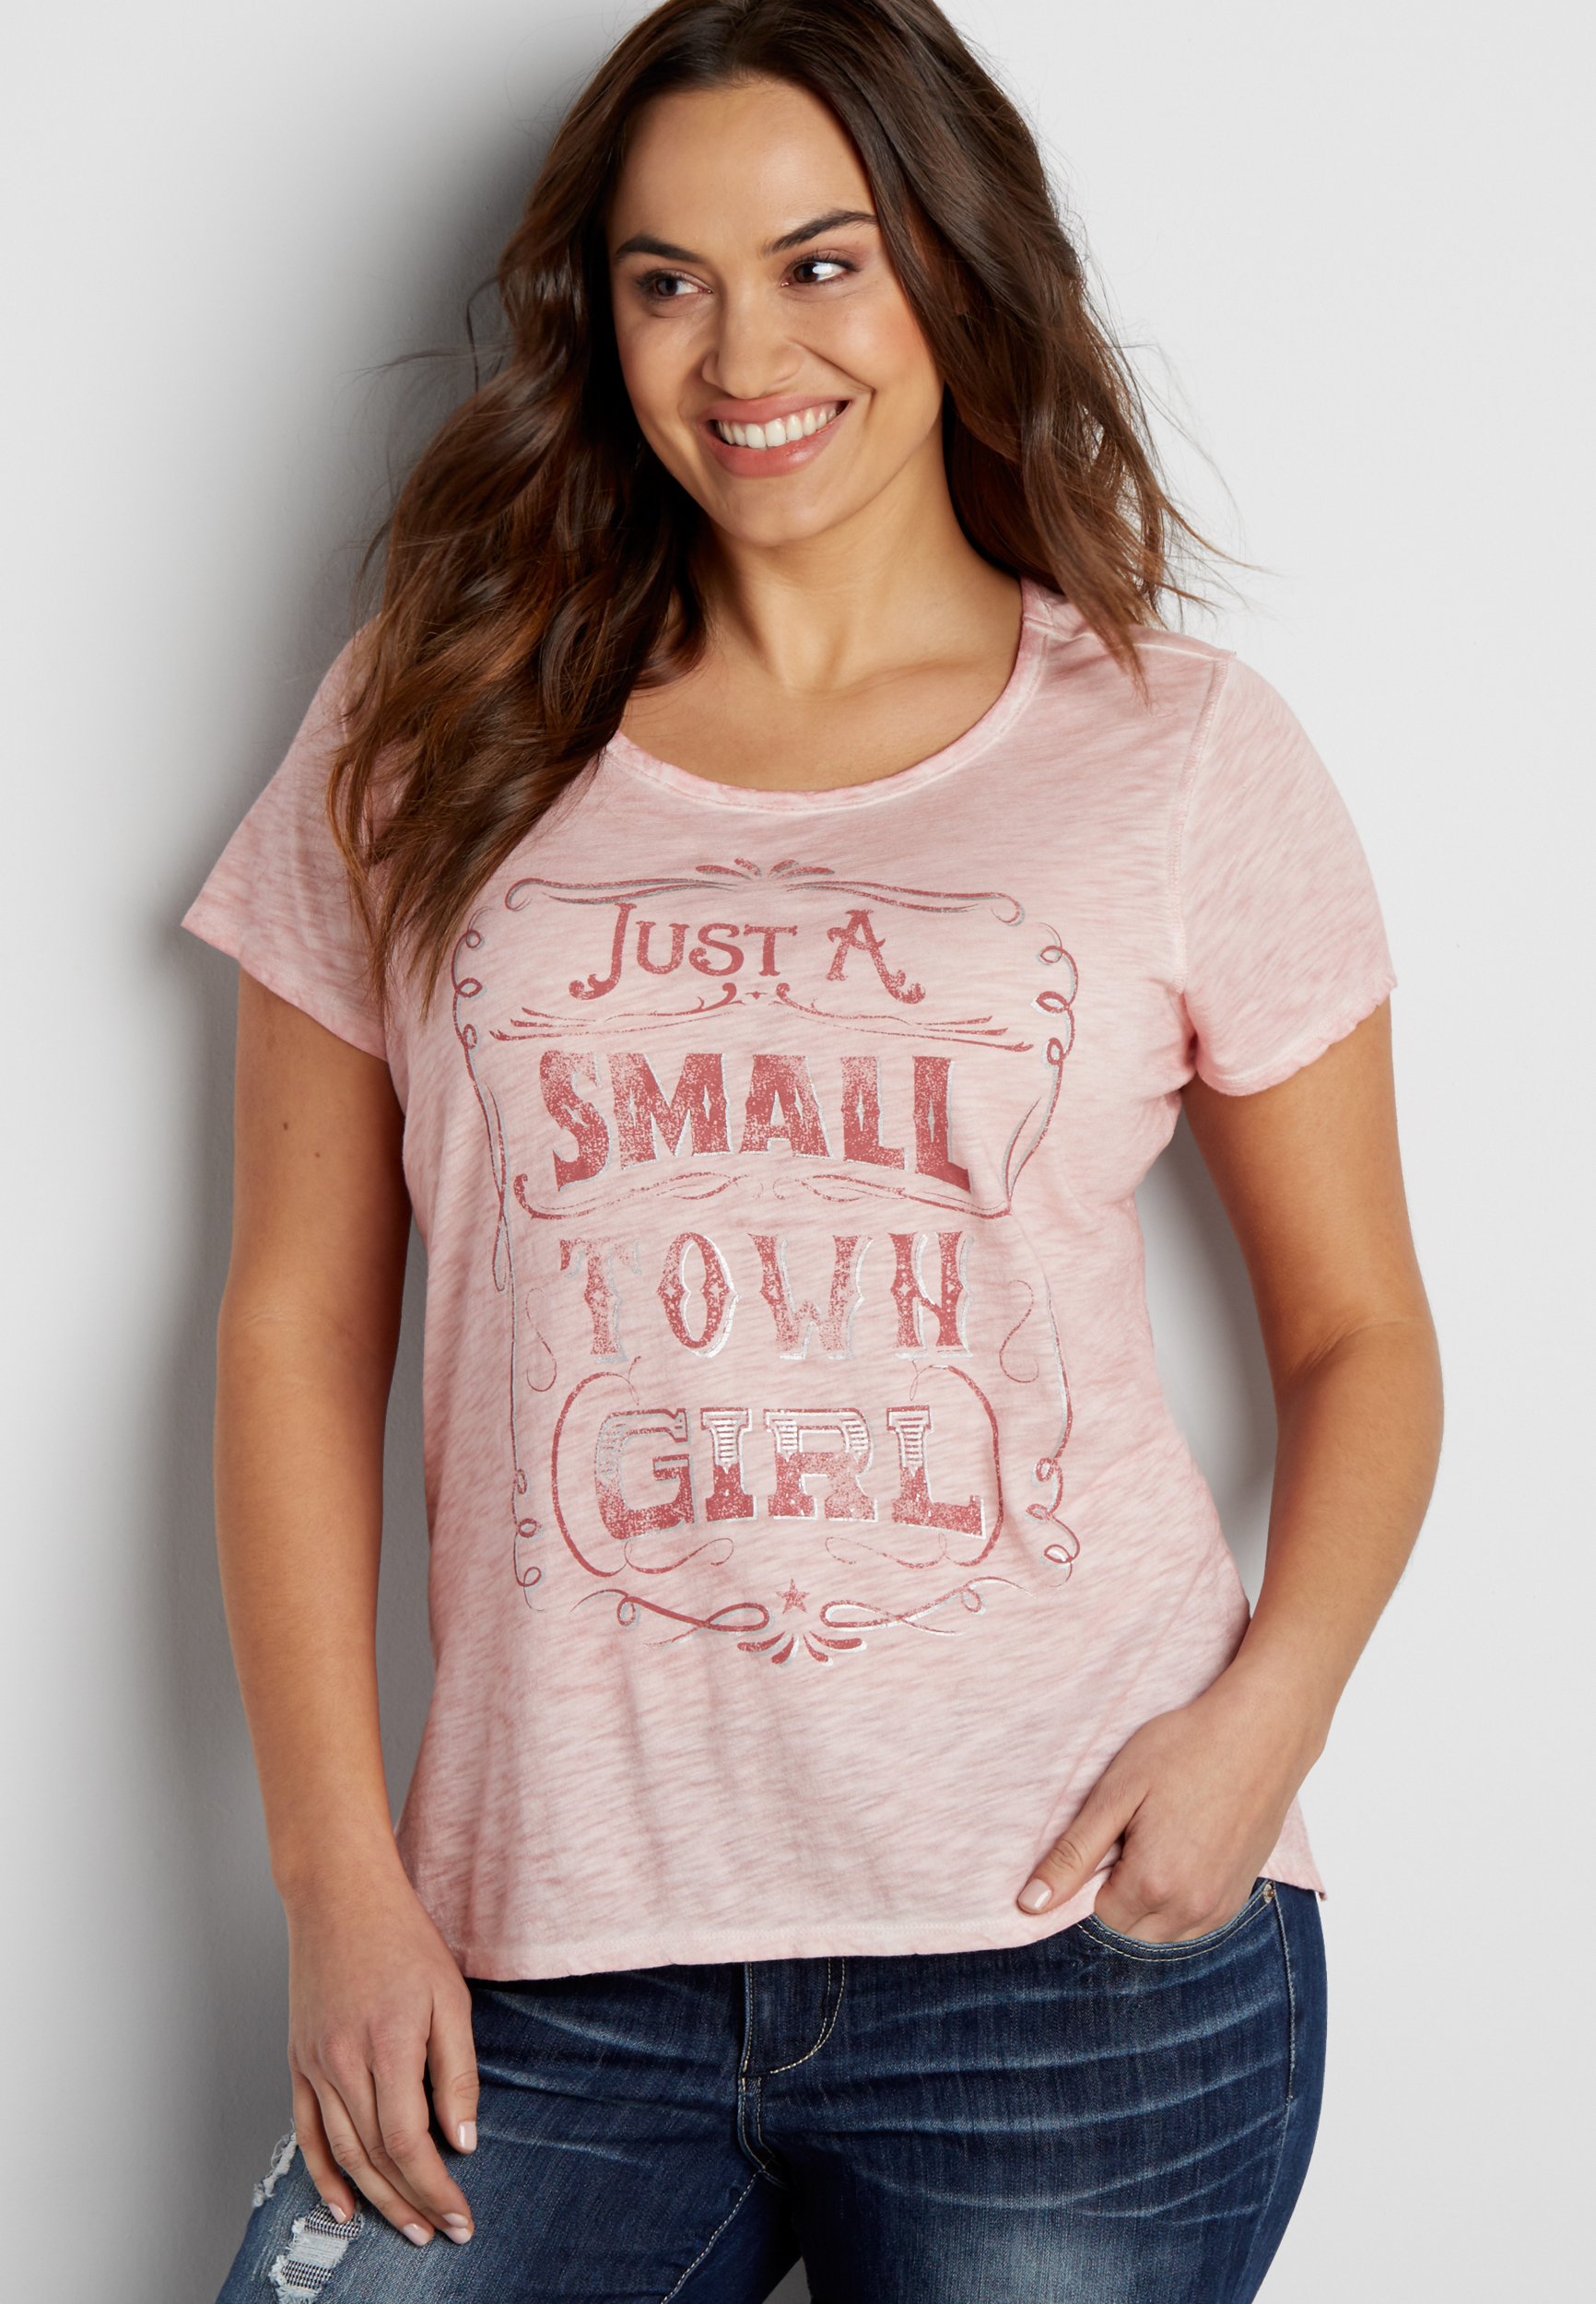 plus size tee with just a small town girl graphic | maurices